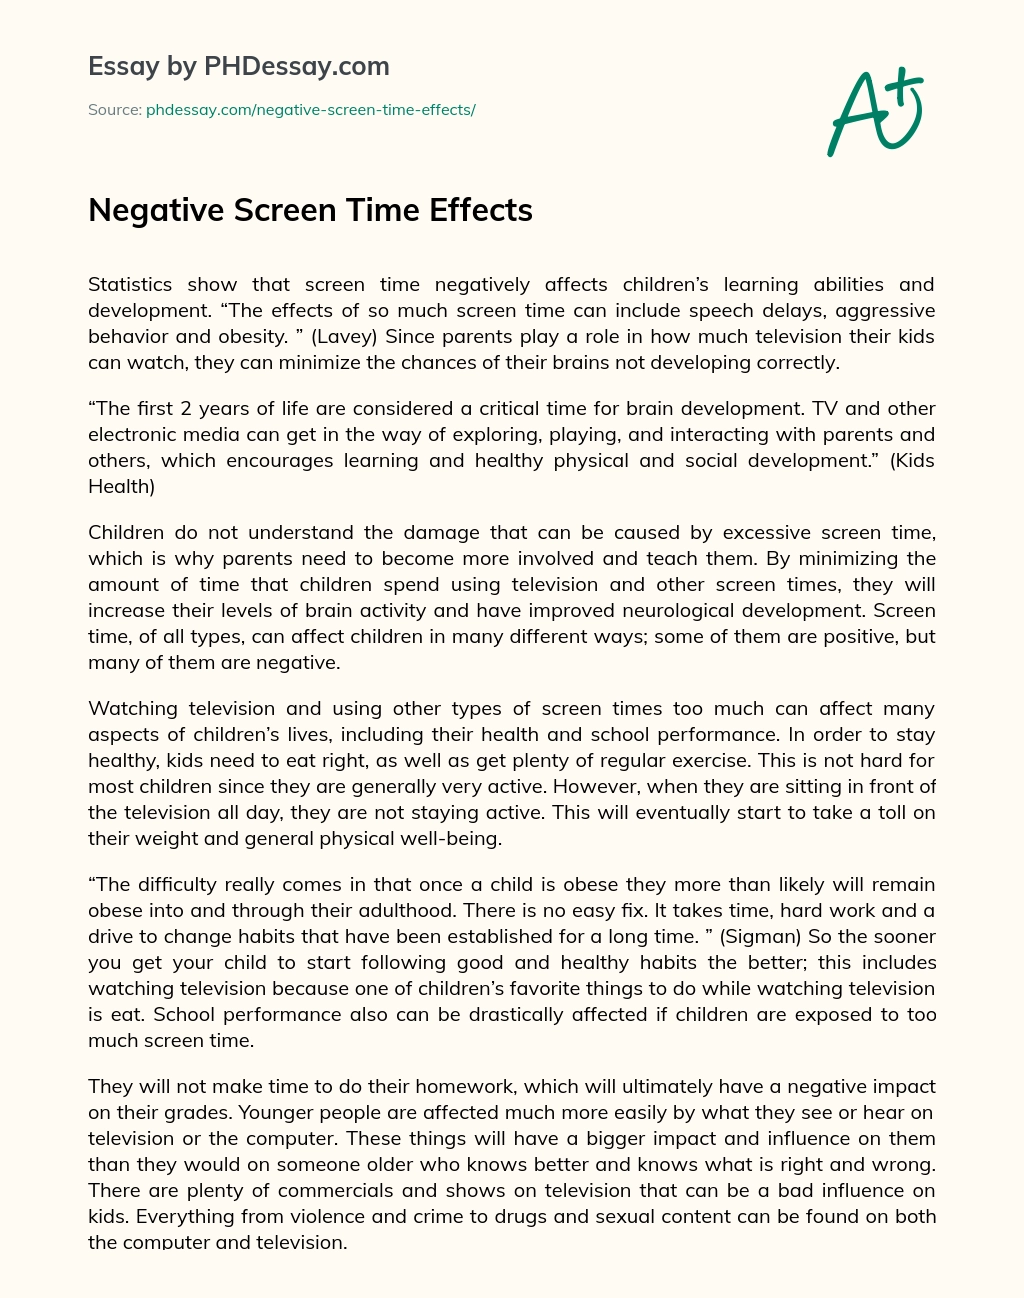 Negative Screen Time Effects essay